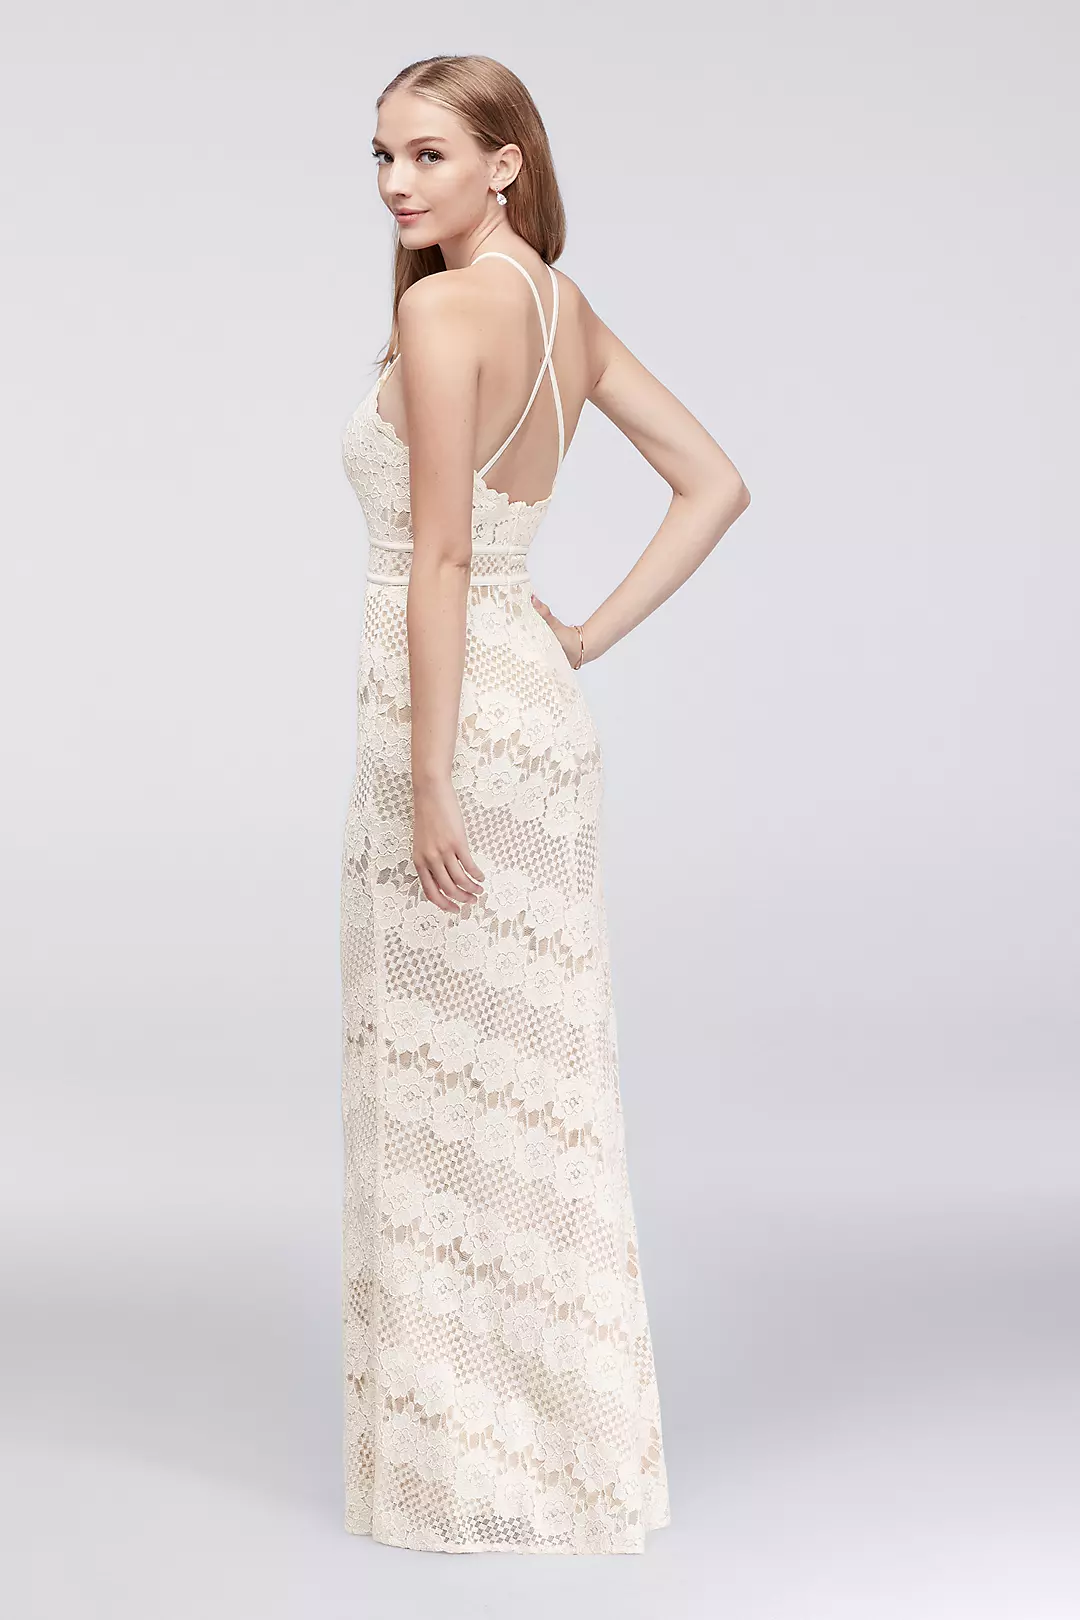 Floral Lace Cross-Back Halter Gown Image 2